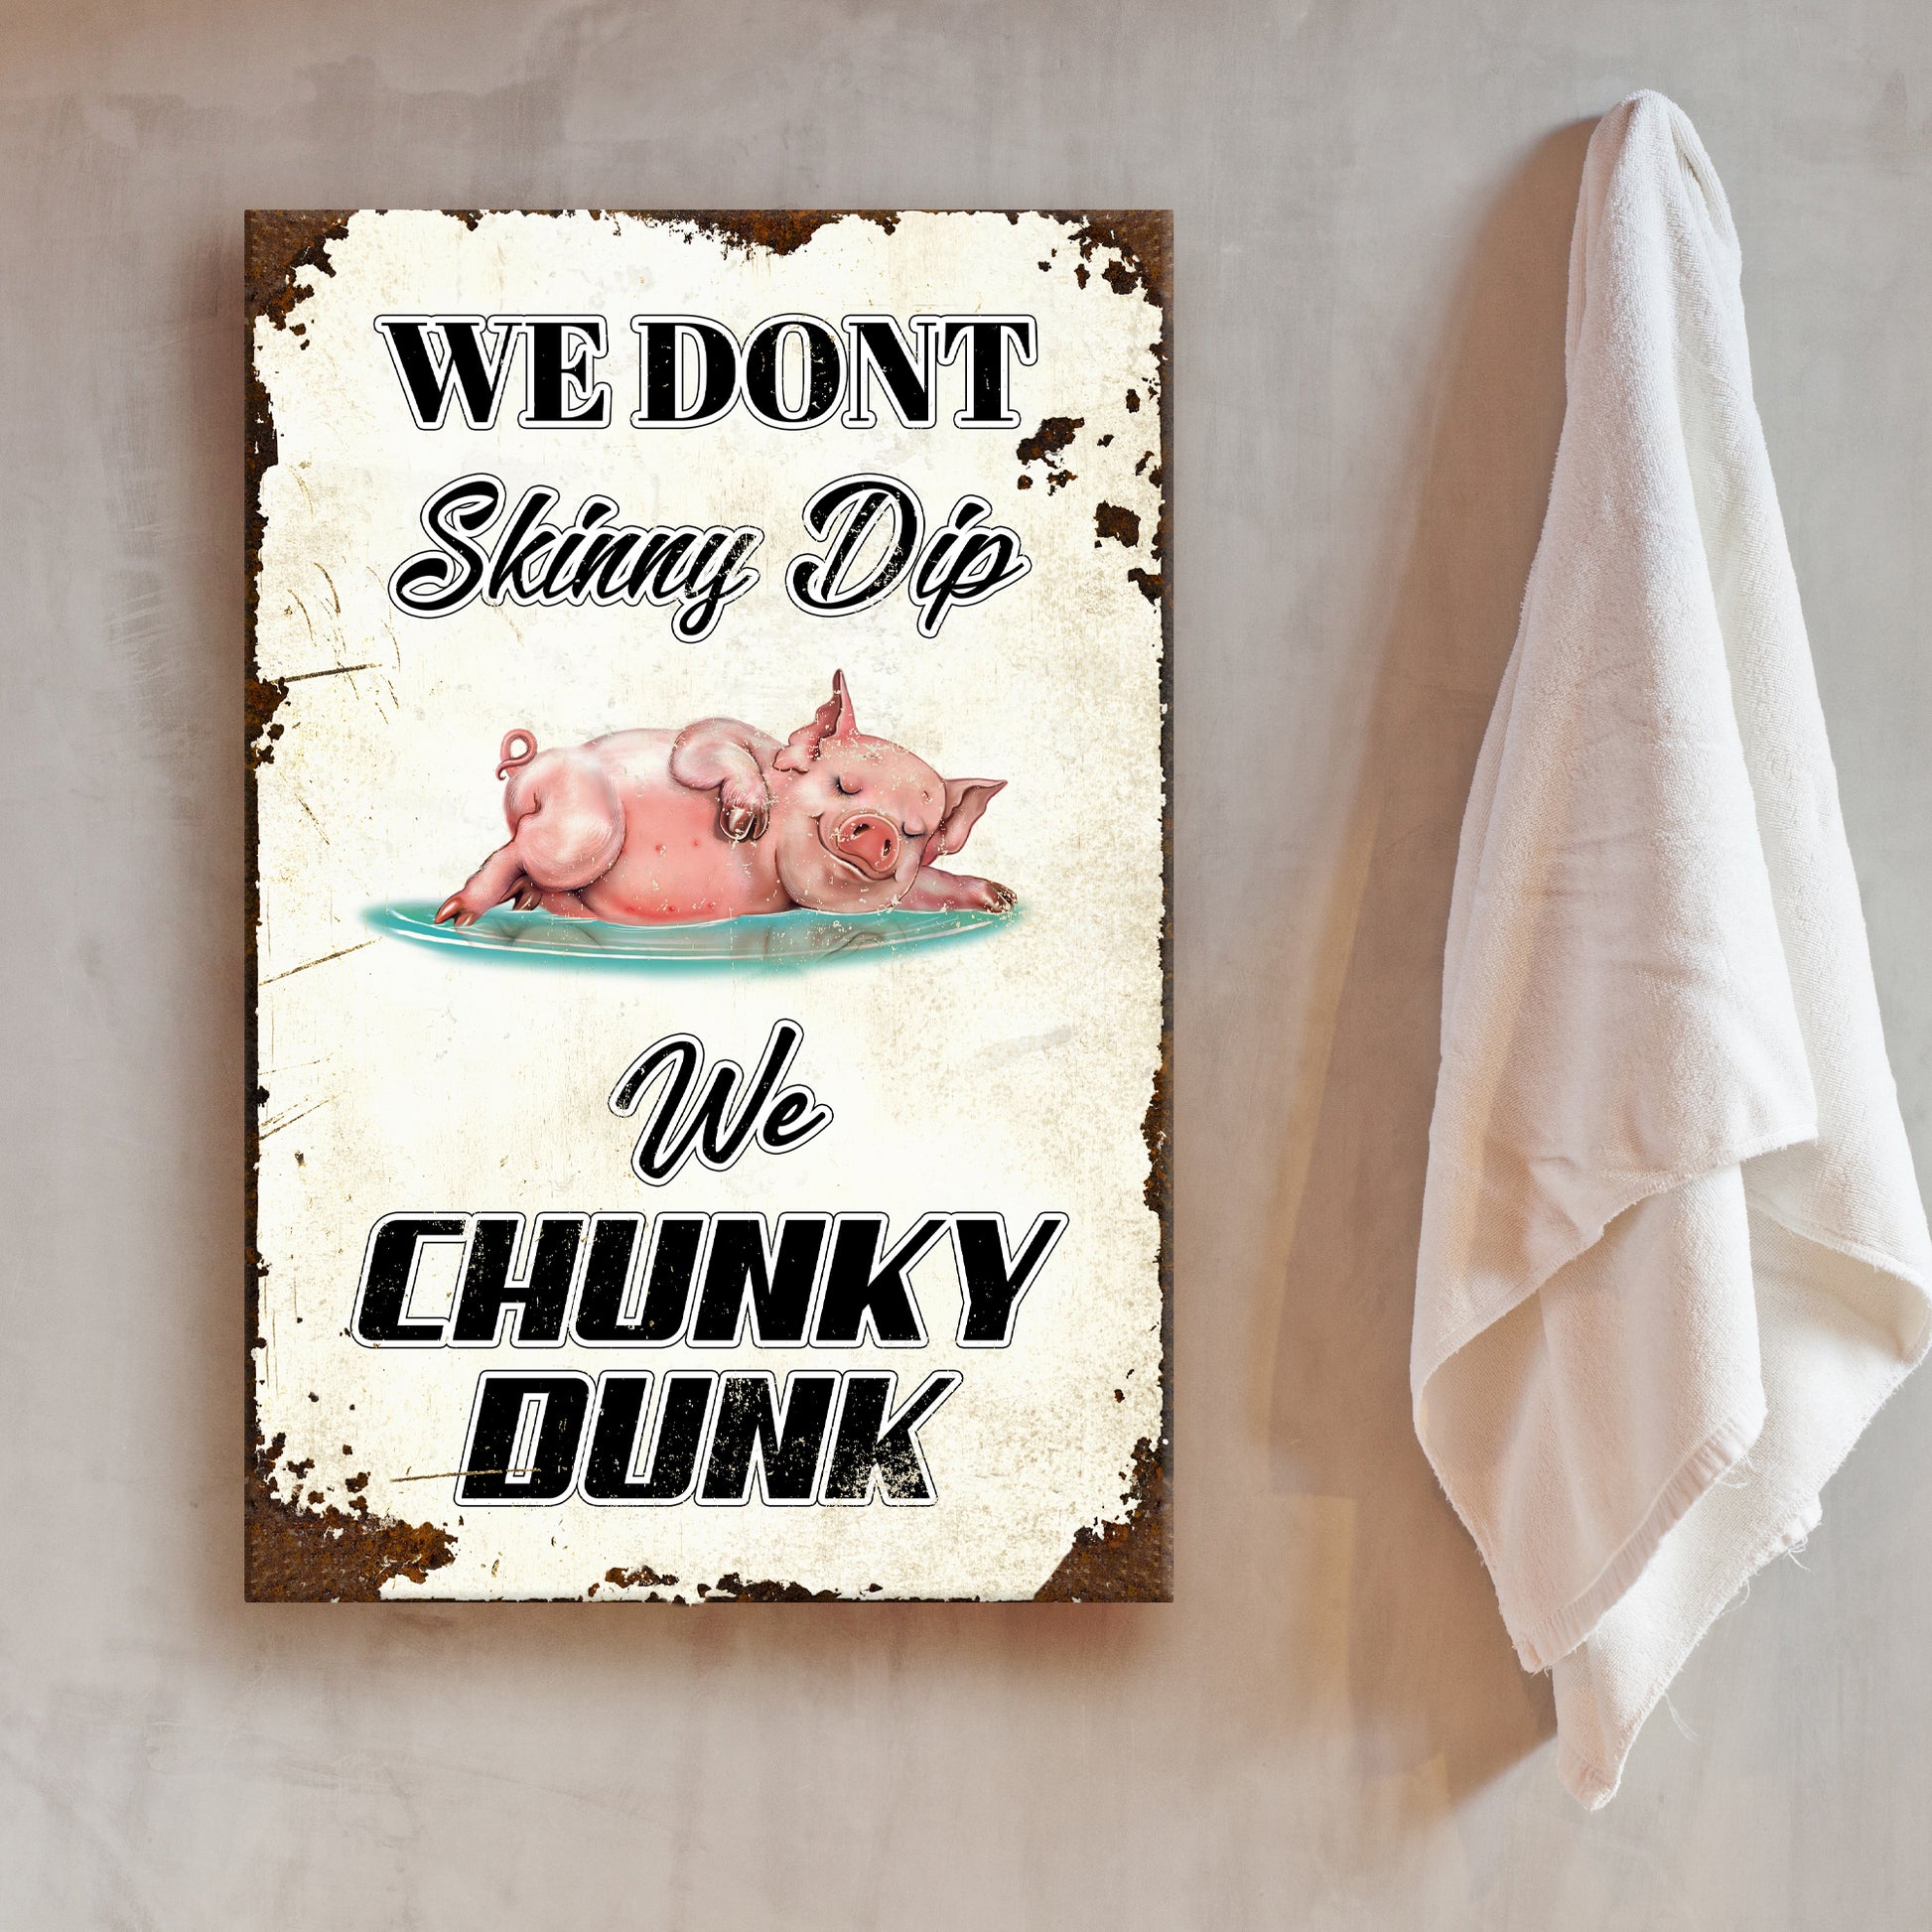 We Don't Skinny Dip We Chunky Dunk Sign II - Image by Tailored Canvases